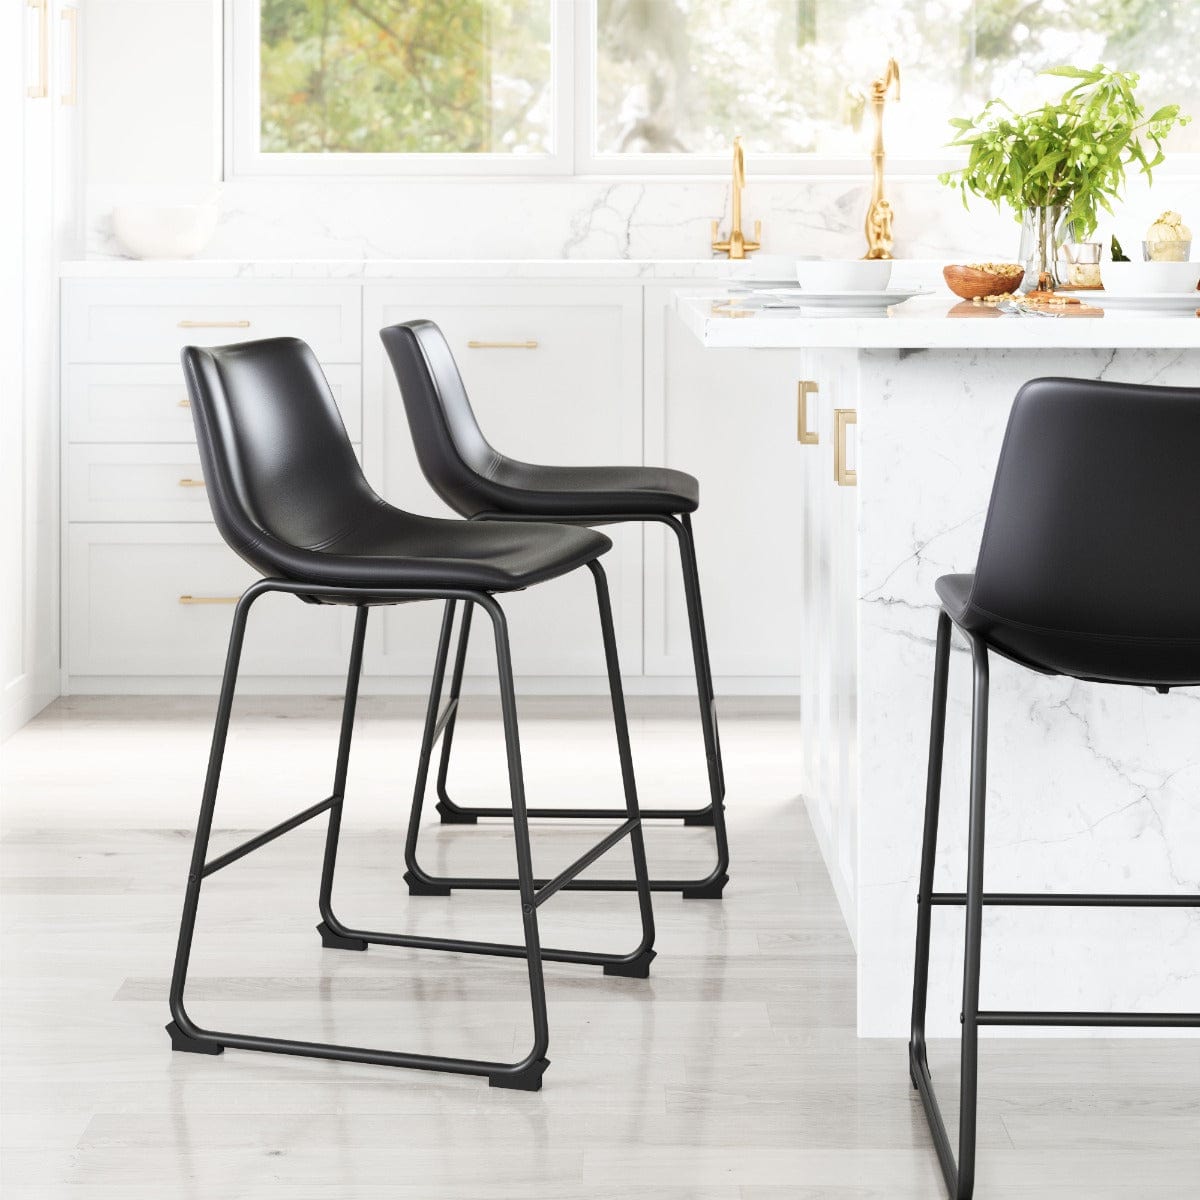 Set of 2 Smart Counter Chairs in Black 